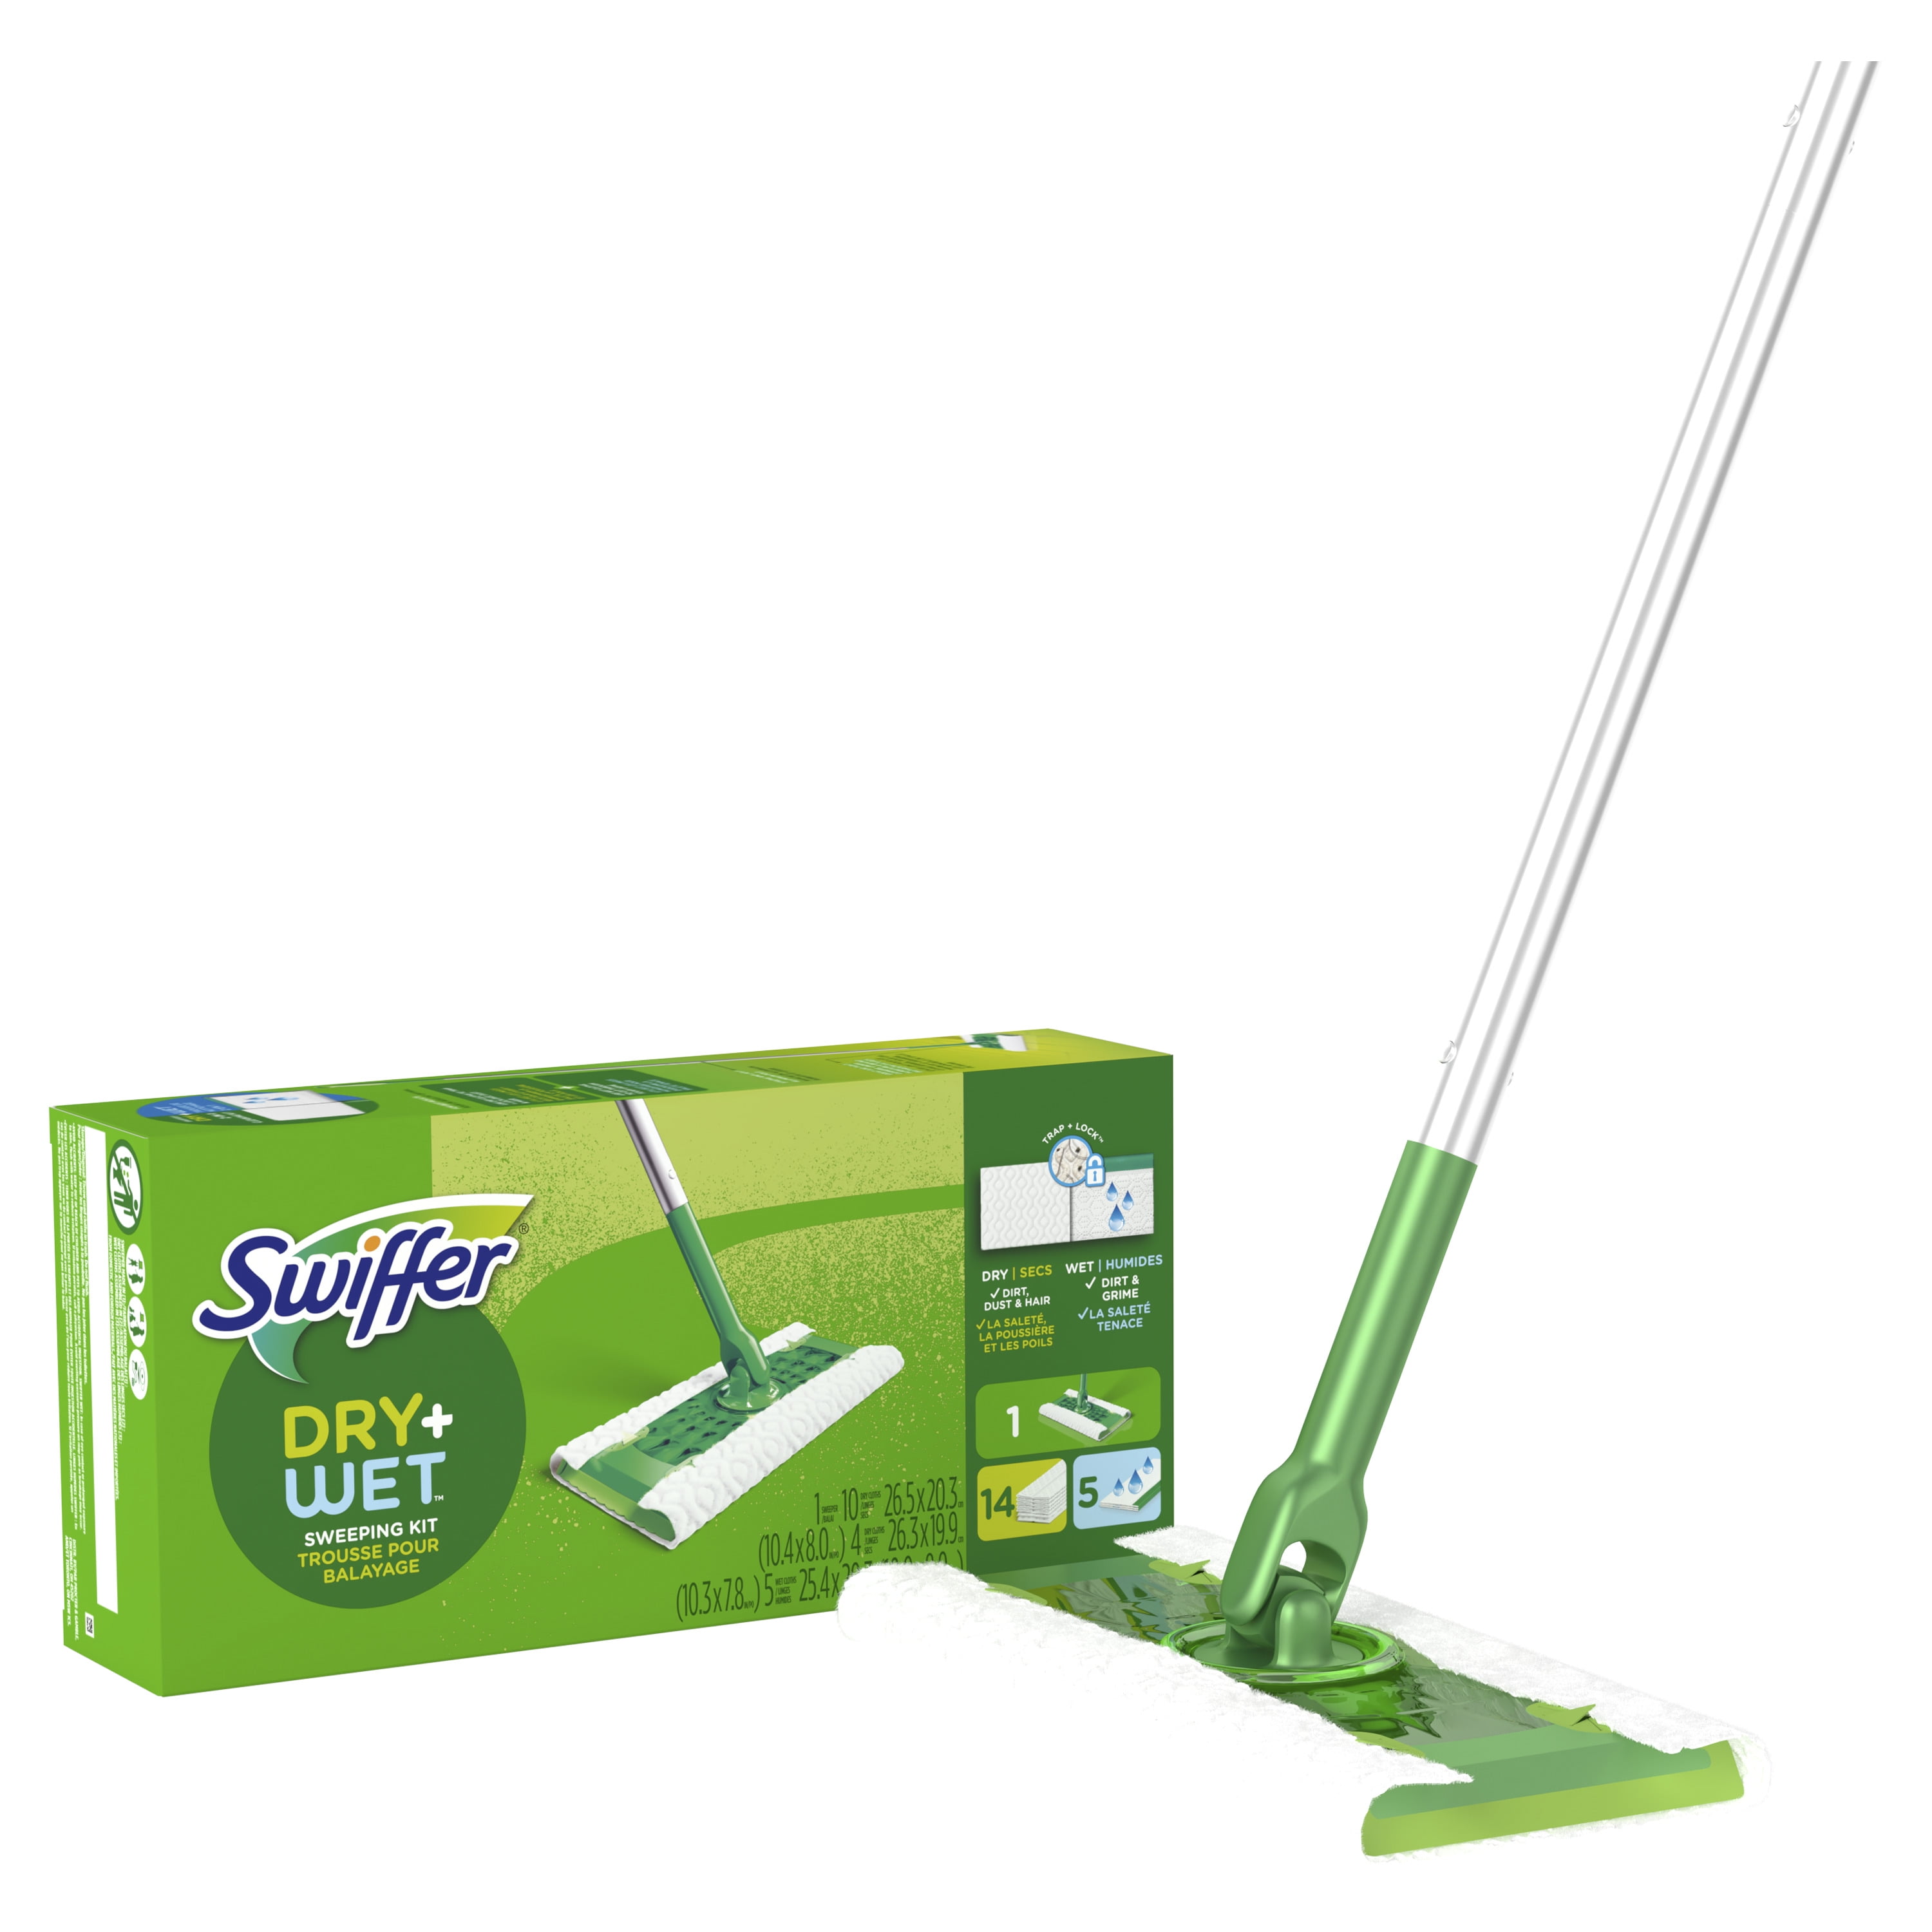 Swiffer Sweeper 2-in-1 Sweep and Mop Starter Kit,1 Mop 19 Refills 